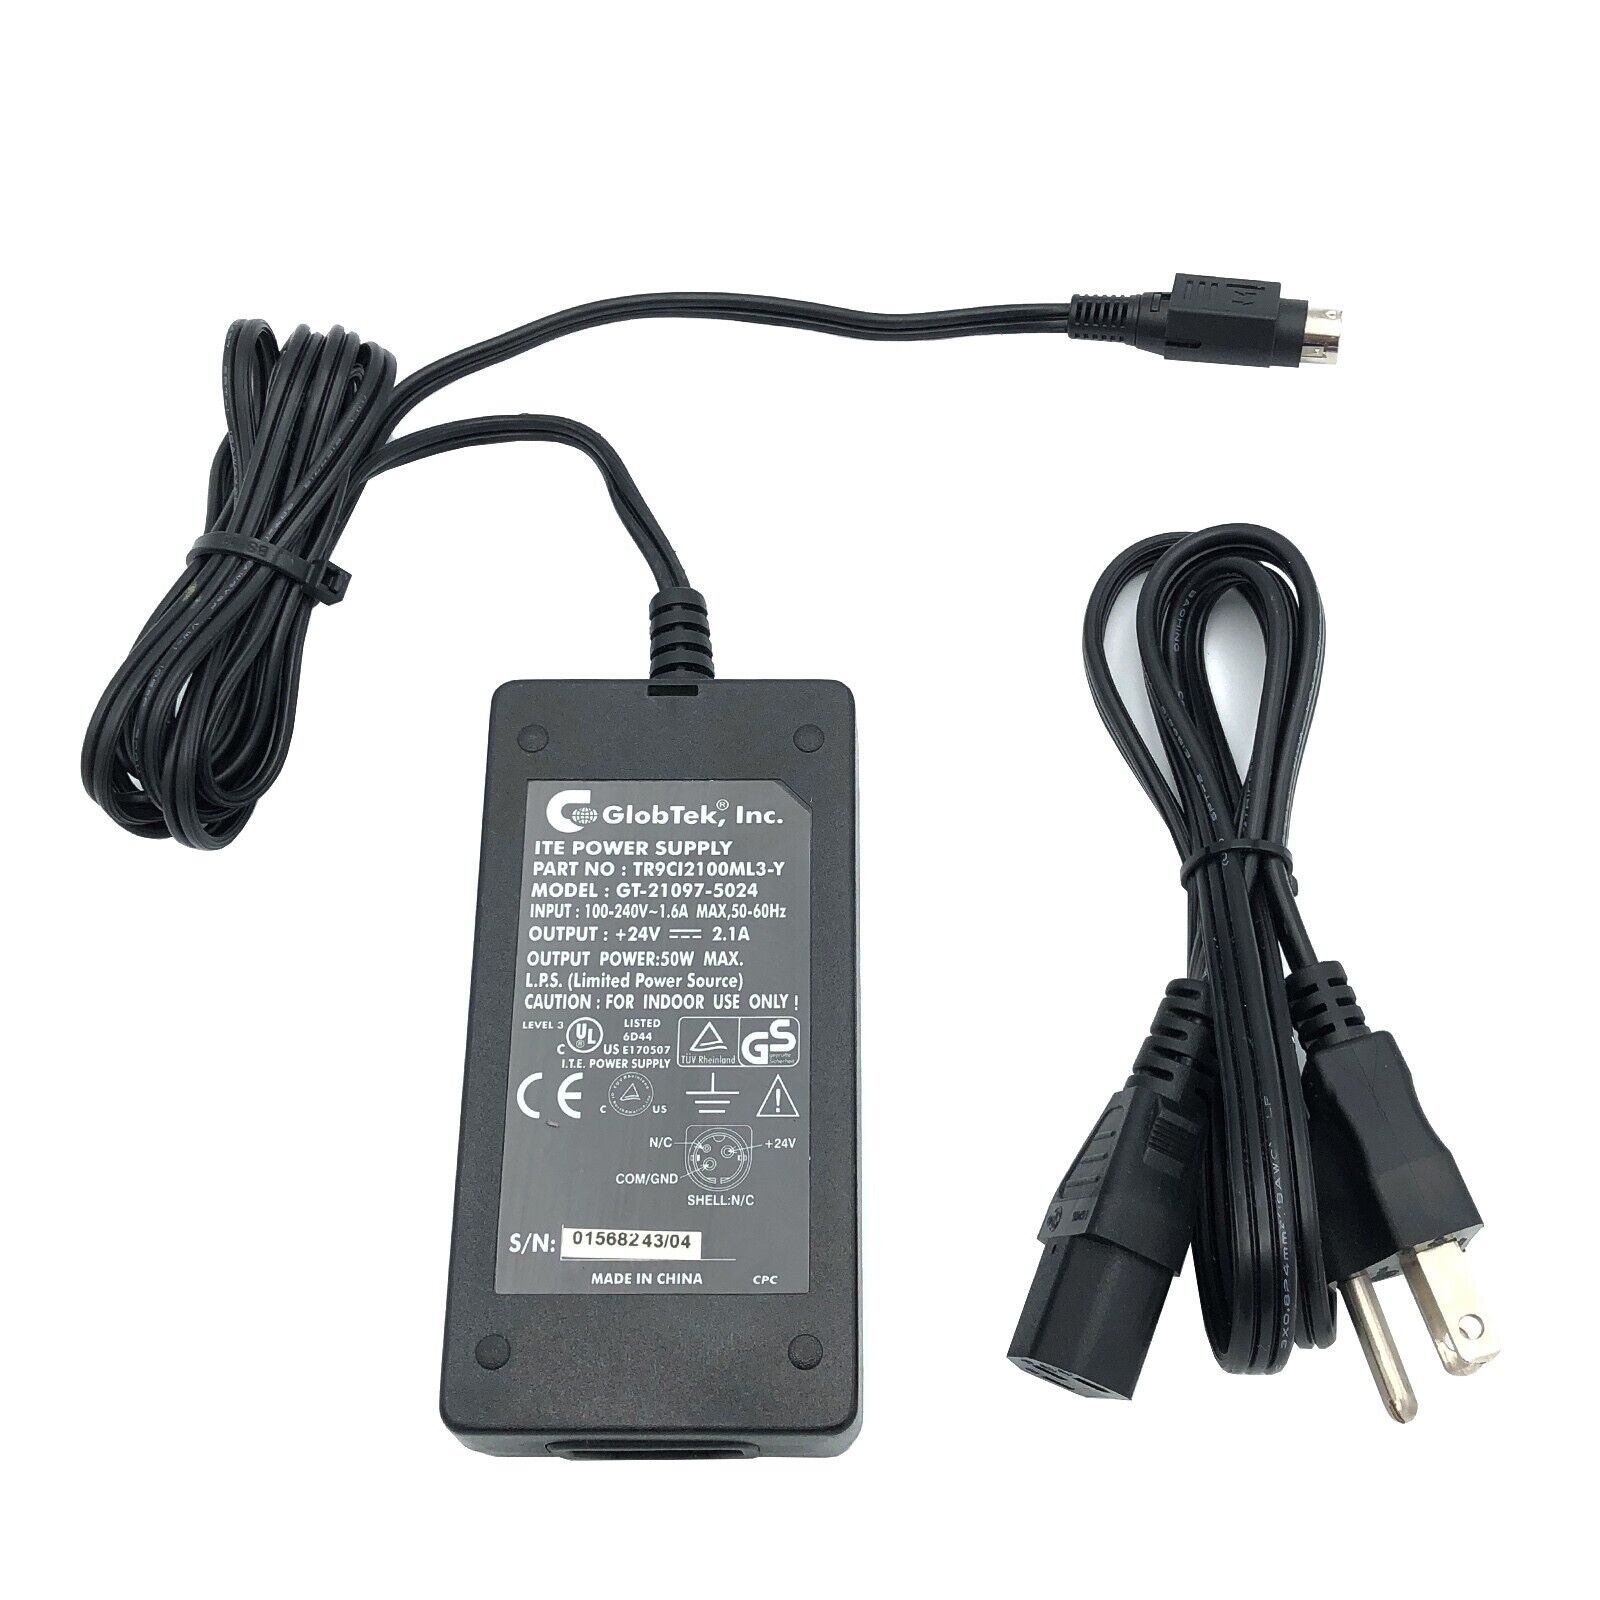 Genuine GlobTek GT-21097-5024 AC Power Supply Adapter 3 Pin TR9C12100ML3-Y w/PC Compatible Brand Universal Connection S